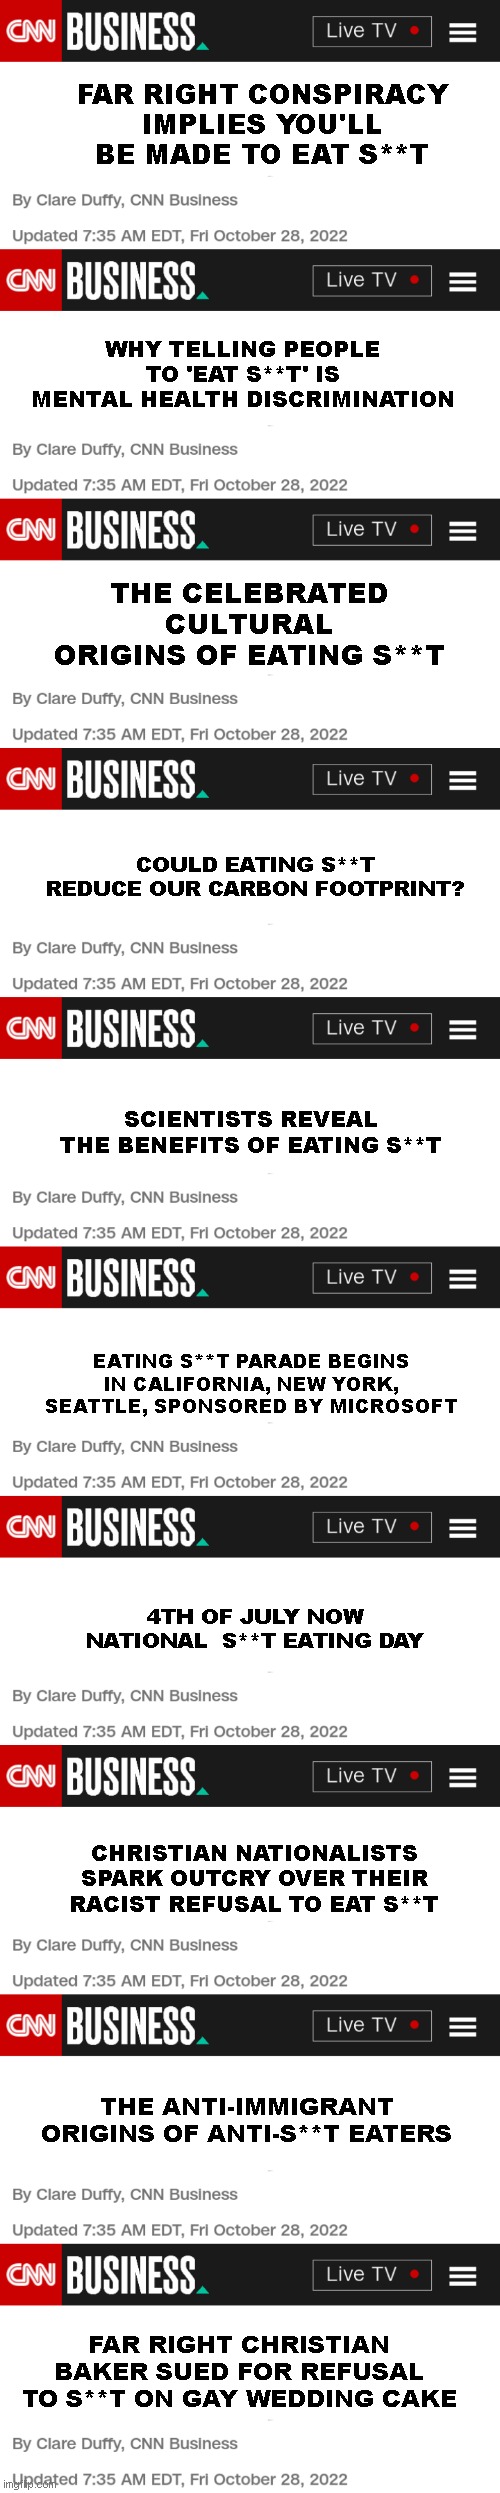 FAR RIGHT CONSPIRACY IMPLIES YOU'LL BE MADE TO EAT S**T; WHY TELLING PEOPLE TO 'EAT S**T' IS MENTAL HEALTH DISCRIMINATION; THE CELEBRATED CULTURAL ORIGINS OF EATING S**T; COULD EATING S**T REDUCE OUR CARBON FOOTPRINT? SCIENTISTS REVEAL THE BENEFITS OF EATING S**T; EATING S**T PARADE BEGINS IN CALIFORNIA, NEW YORK, SEATTLE, SPONSORED BY MICROSOFT; 4TH OF JULY NOW NATIONAL  S**T EATING DAY; CHRISTIAN NATIONALISTS SPARK OUTCRY OVER THEIR RACIST REFUSAL TO EAT S**T; THE ANTI-IMMIGRANT ORIGINS OF ANTI-S**T EATERS; FAR RIGHT CHRISTIAN BAKER SUED FOR REFUSAL TO S**T ON GAY WEDDING CAKE | image tagged in cnn fake headline article news | made w/ Imgflip meme maker